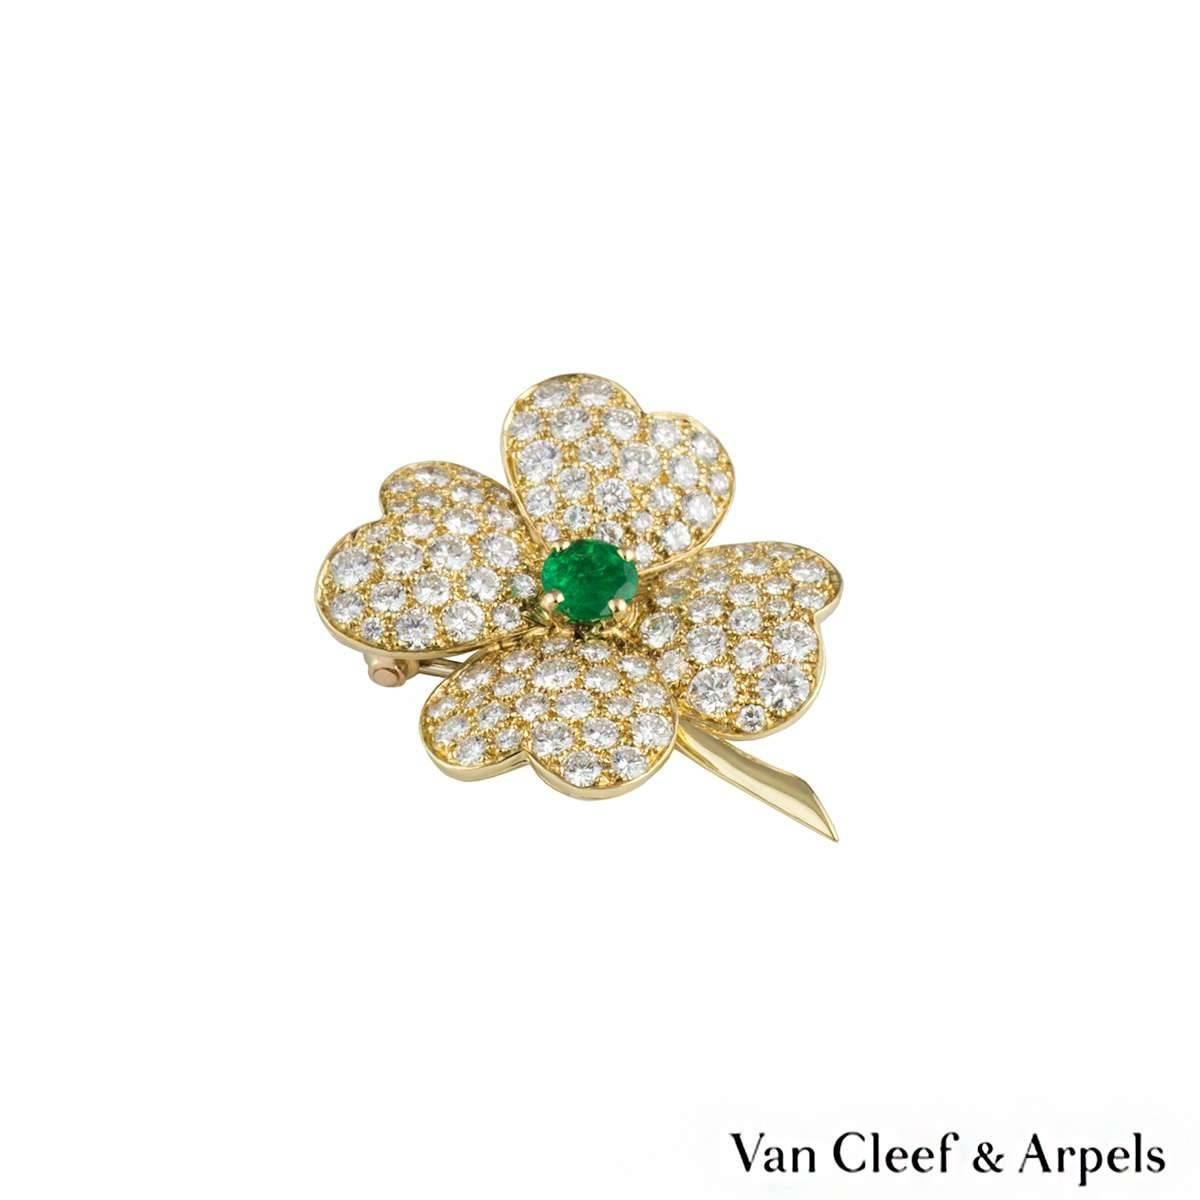 A beautiful 18k yellow gold Van Cleef and Arpels diamond and emerald brooch and earrings from the Cosmos collection. The earrings comprise of a single round cut emerald set to the centre in a 4 claw setting with a total weight of approximately